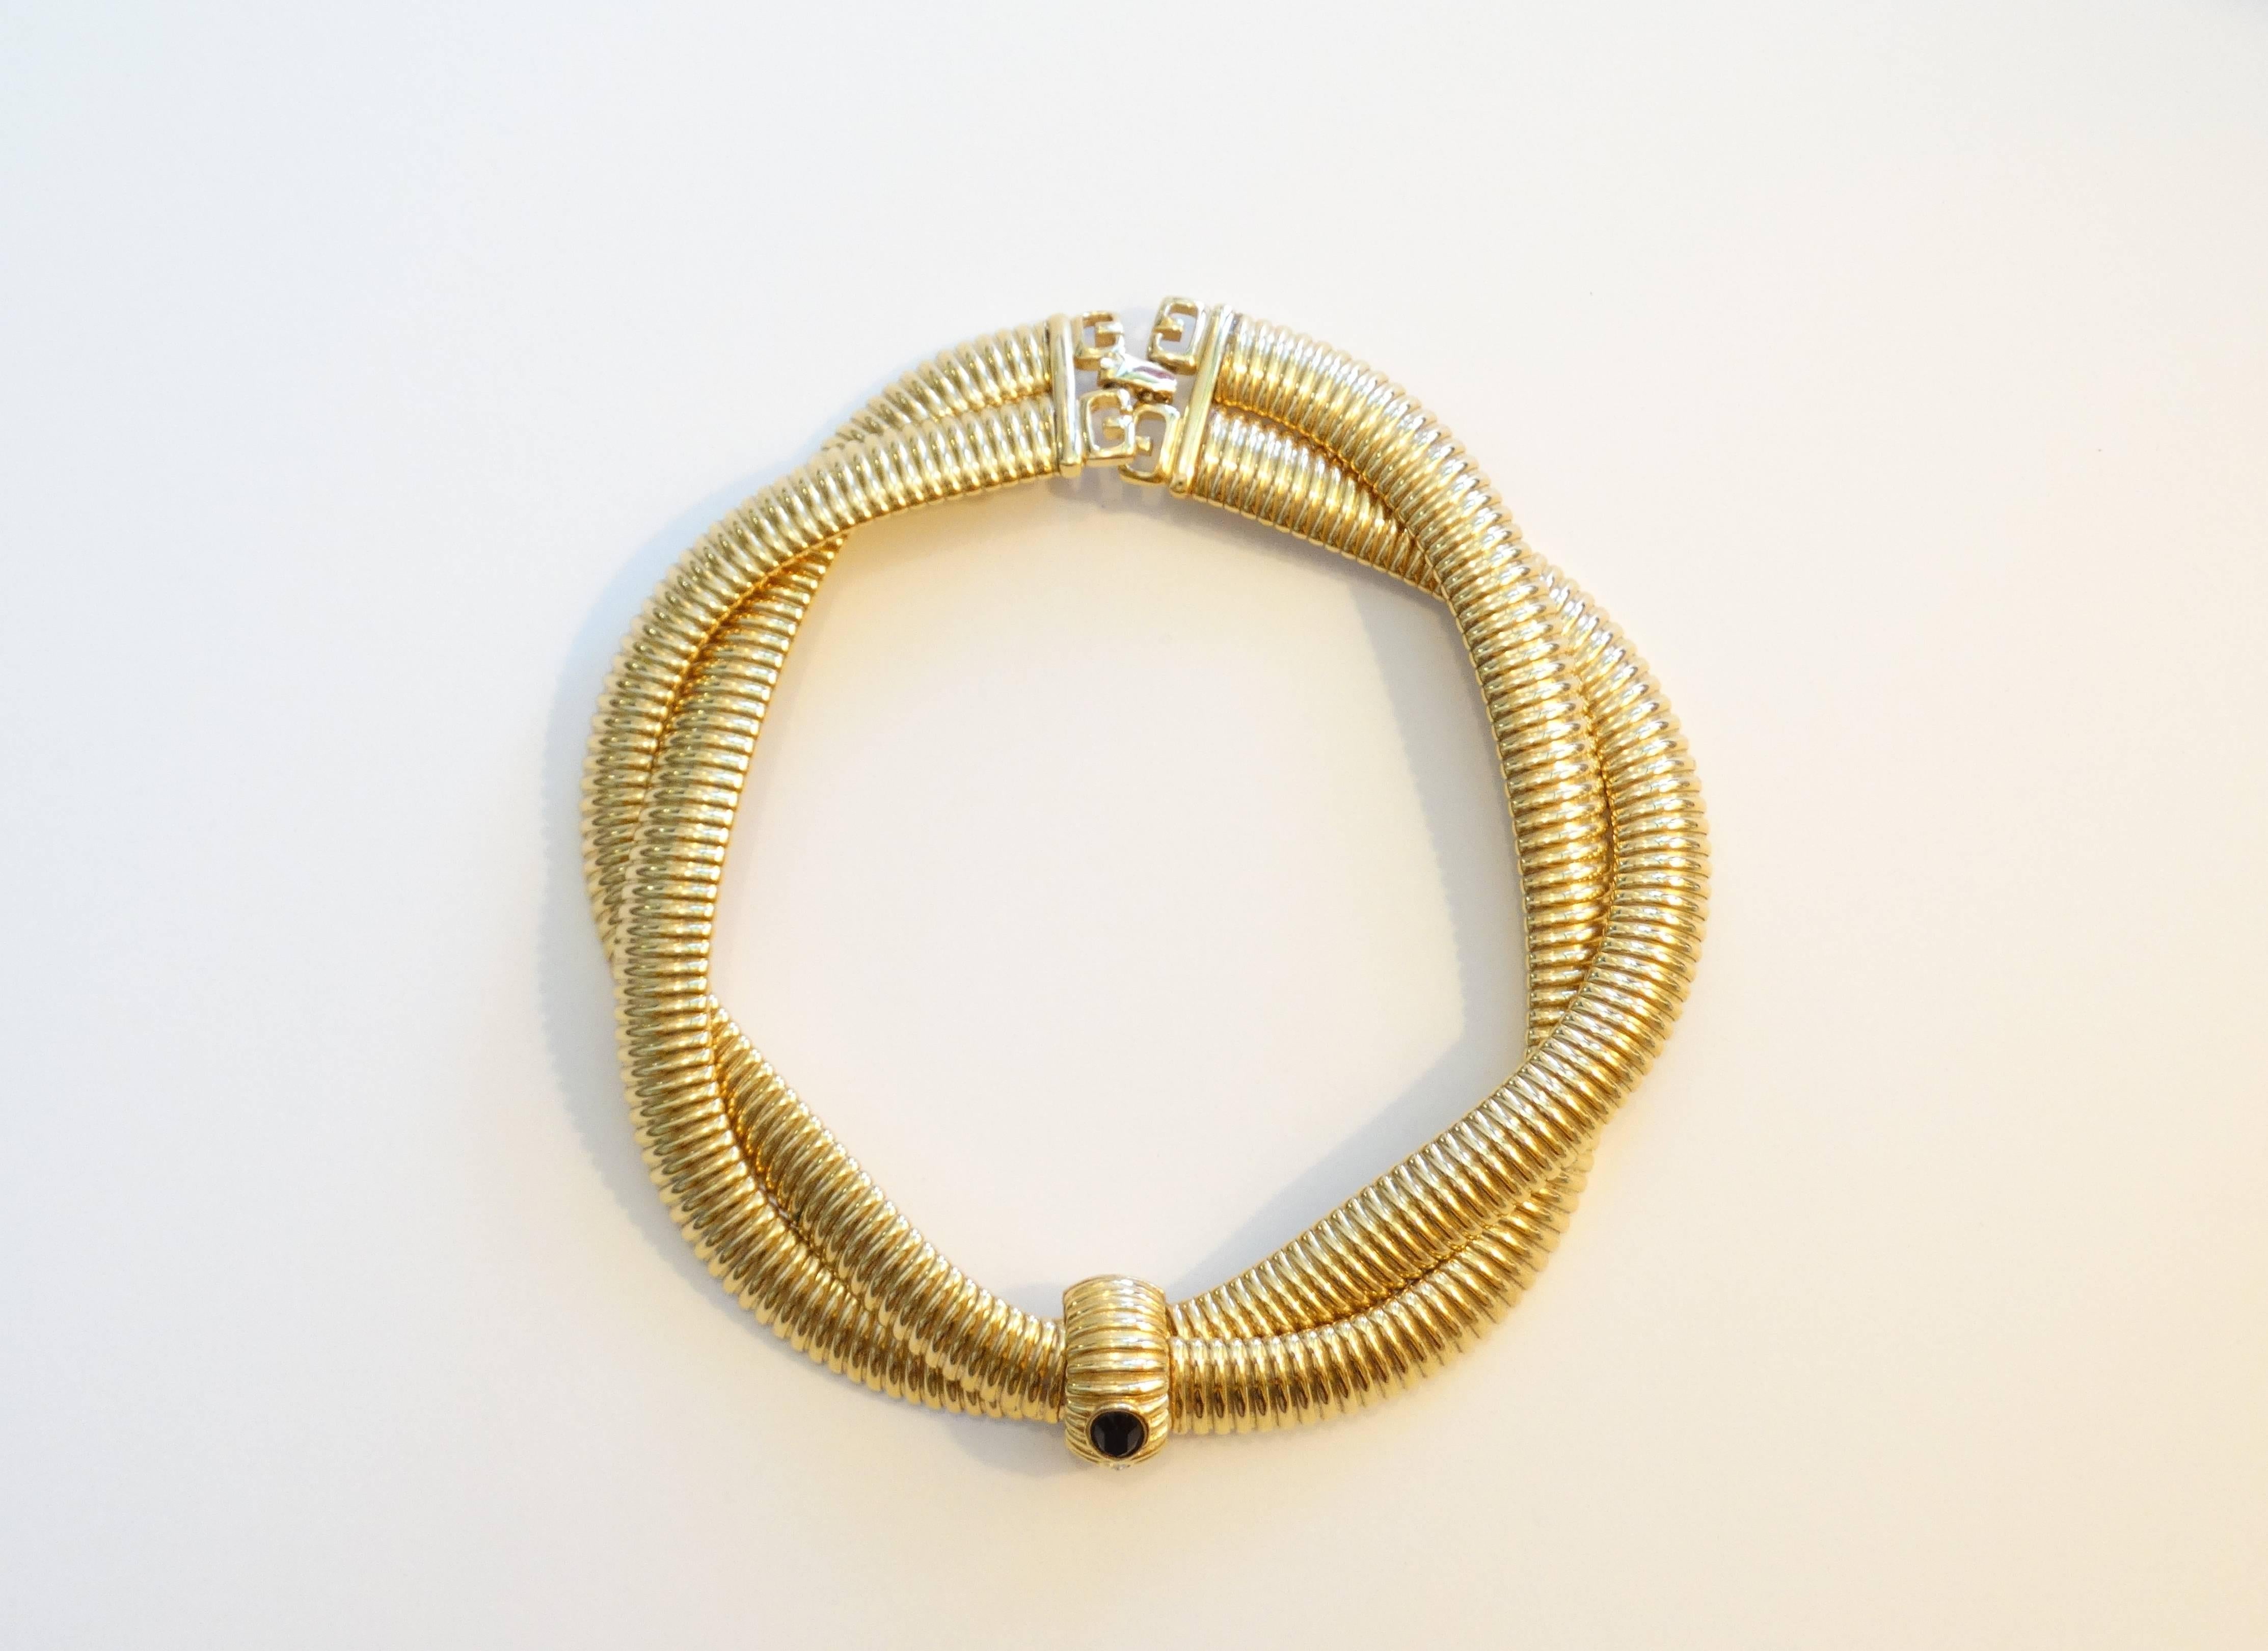 Woven 1980s Givenchy collar necklace! This piece comes to you in brilliant gold metal with a black gem at the center. Signature Givenchy logo Clasp. Signed Givenchy 

Total Length is 16 inches 